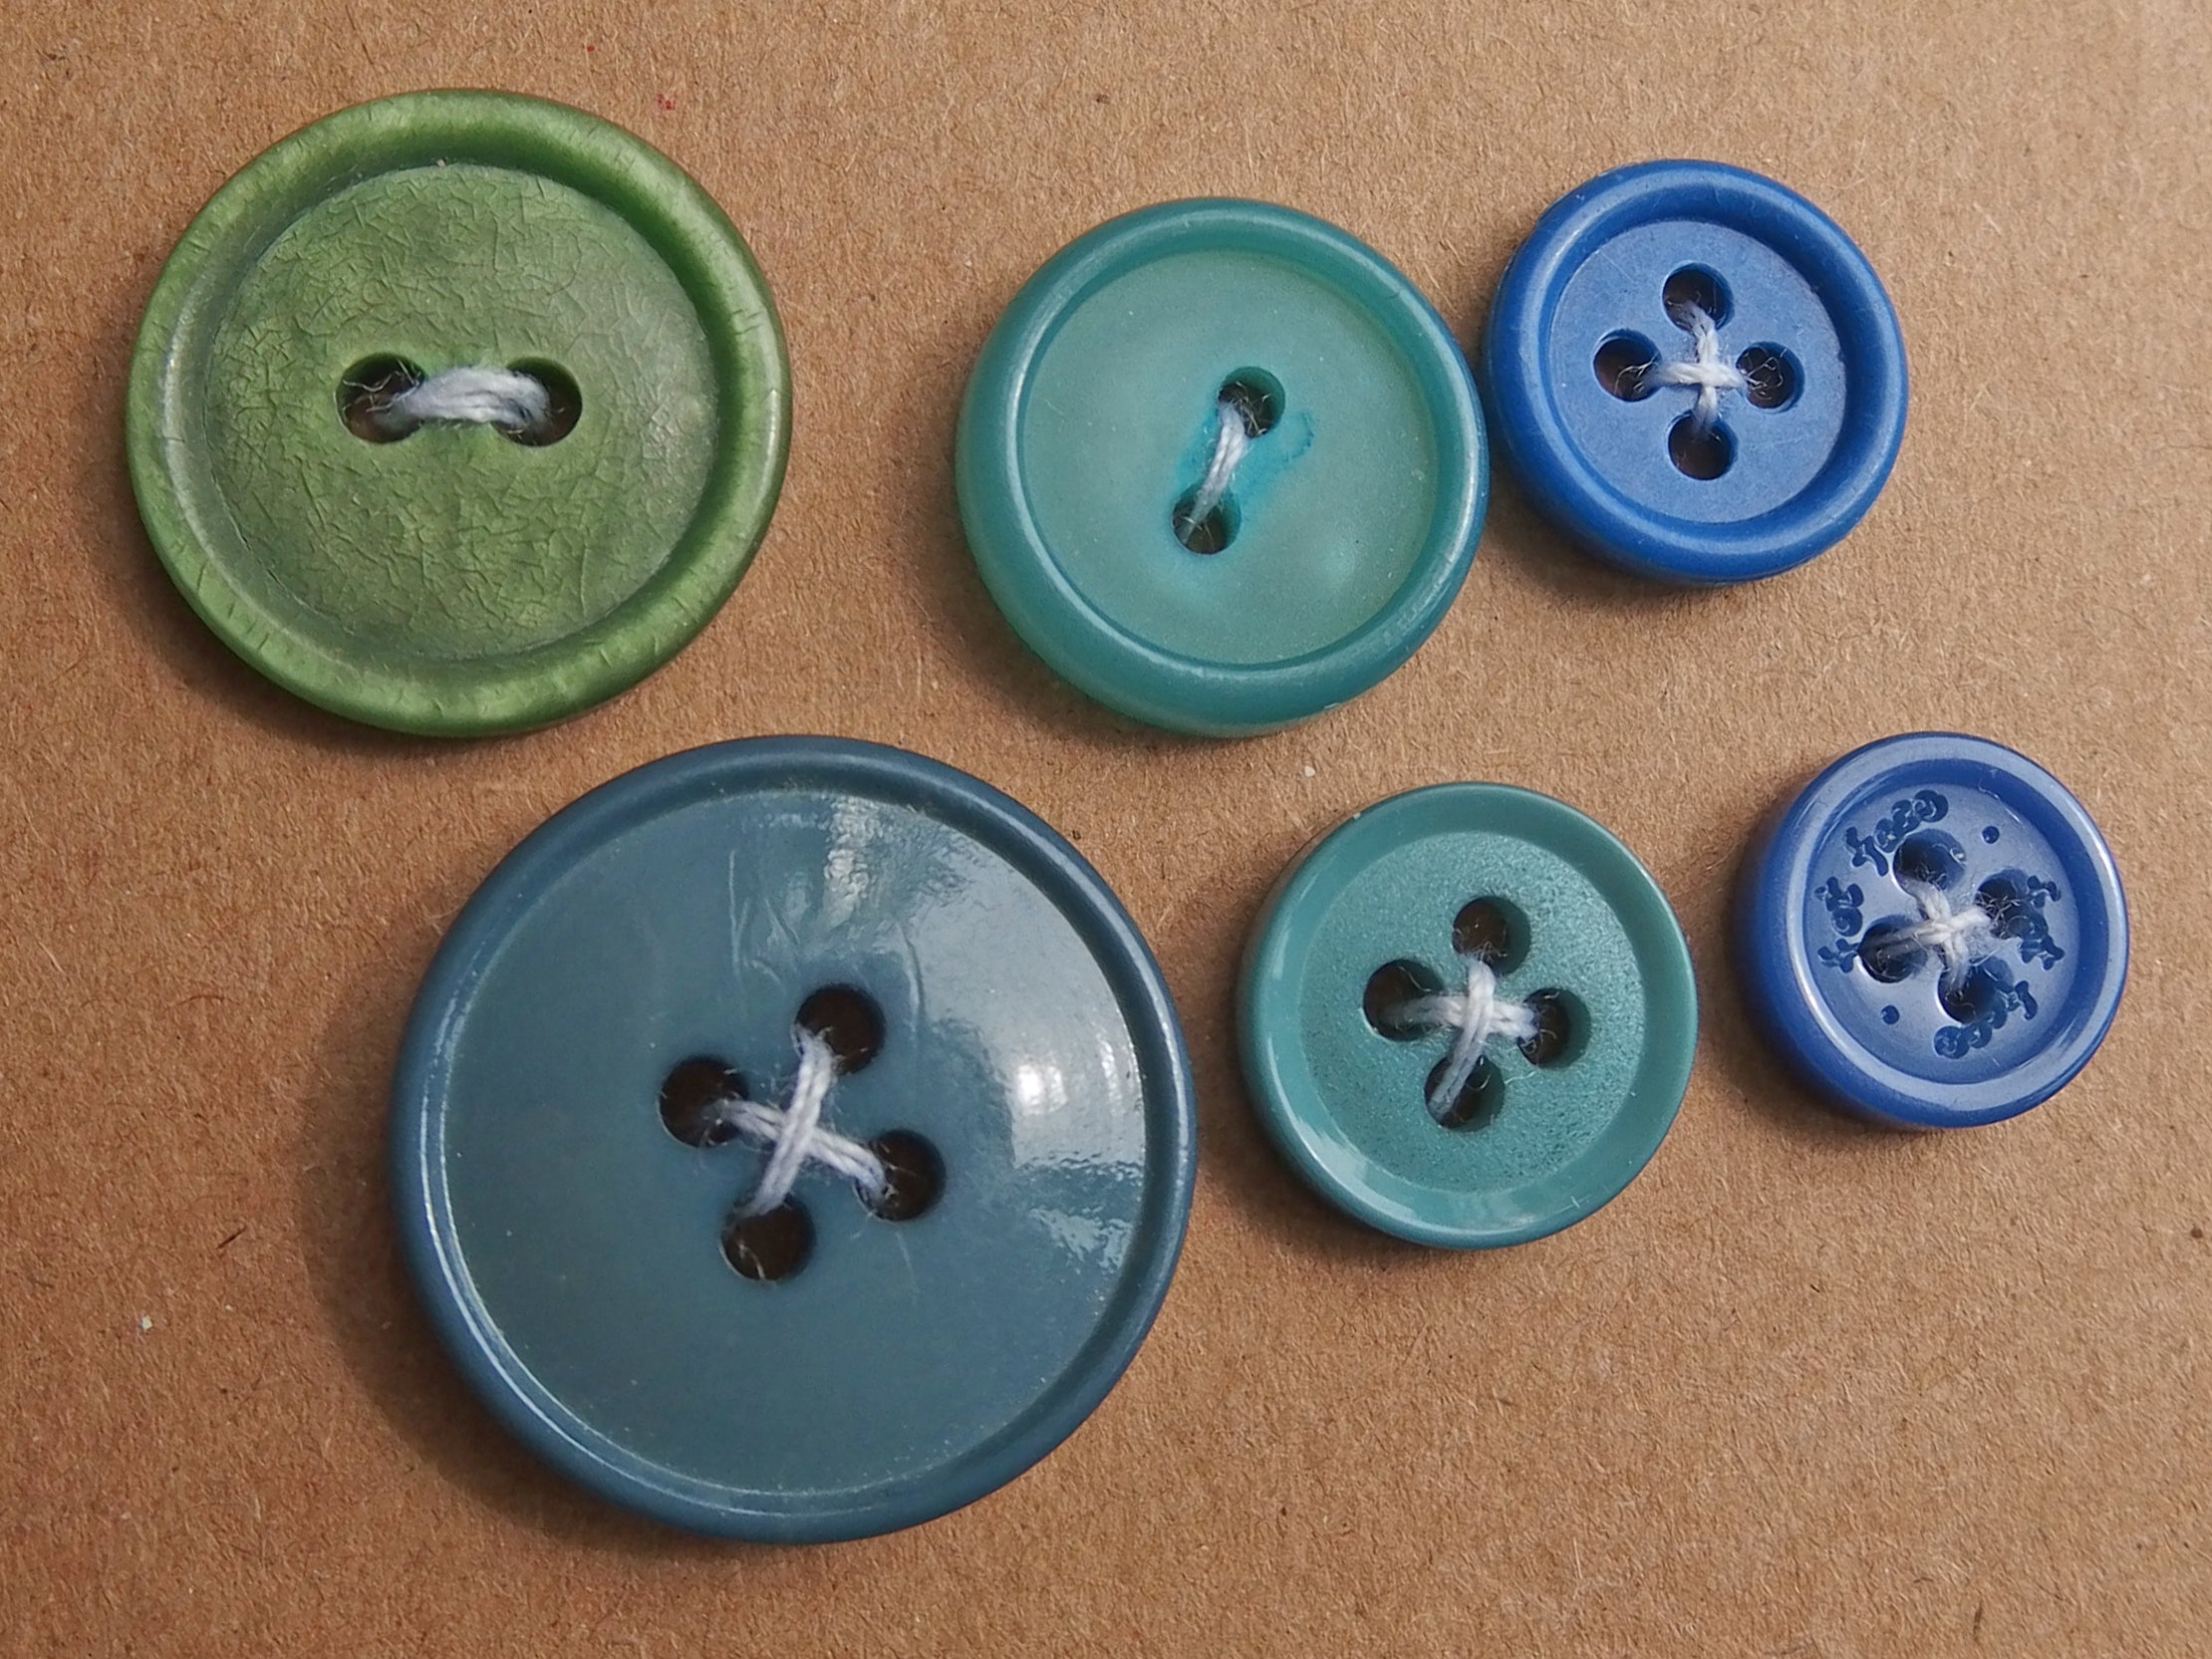 Vintage Buttons: Blue and Green